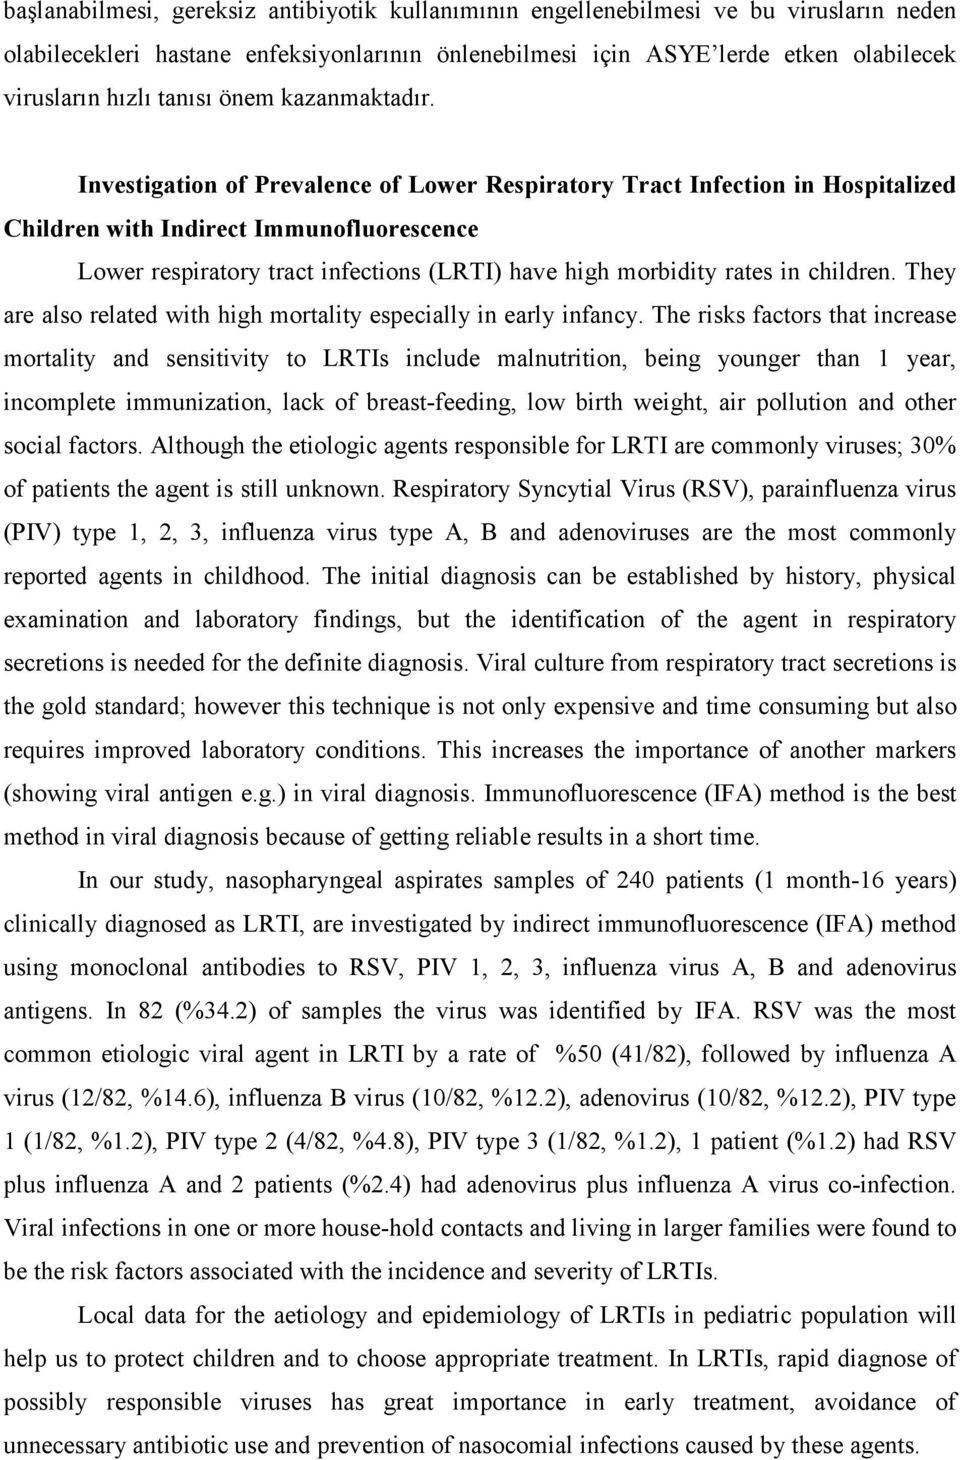 Investigation of Prevalence of Lower Respiratory Tract Infection in Hospitalized Children with Indirect Immunofluorescence Lower respiratory tract infections (LRTI) have high morbidity rates in